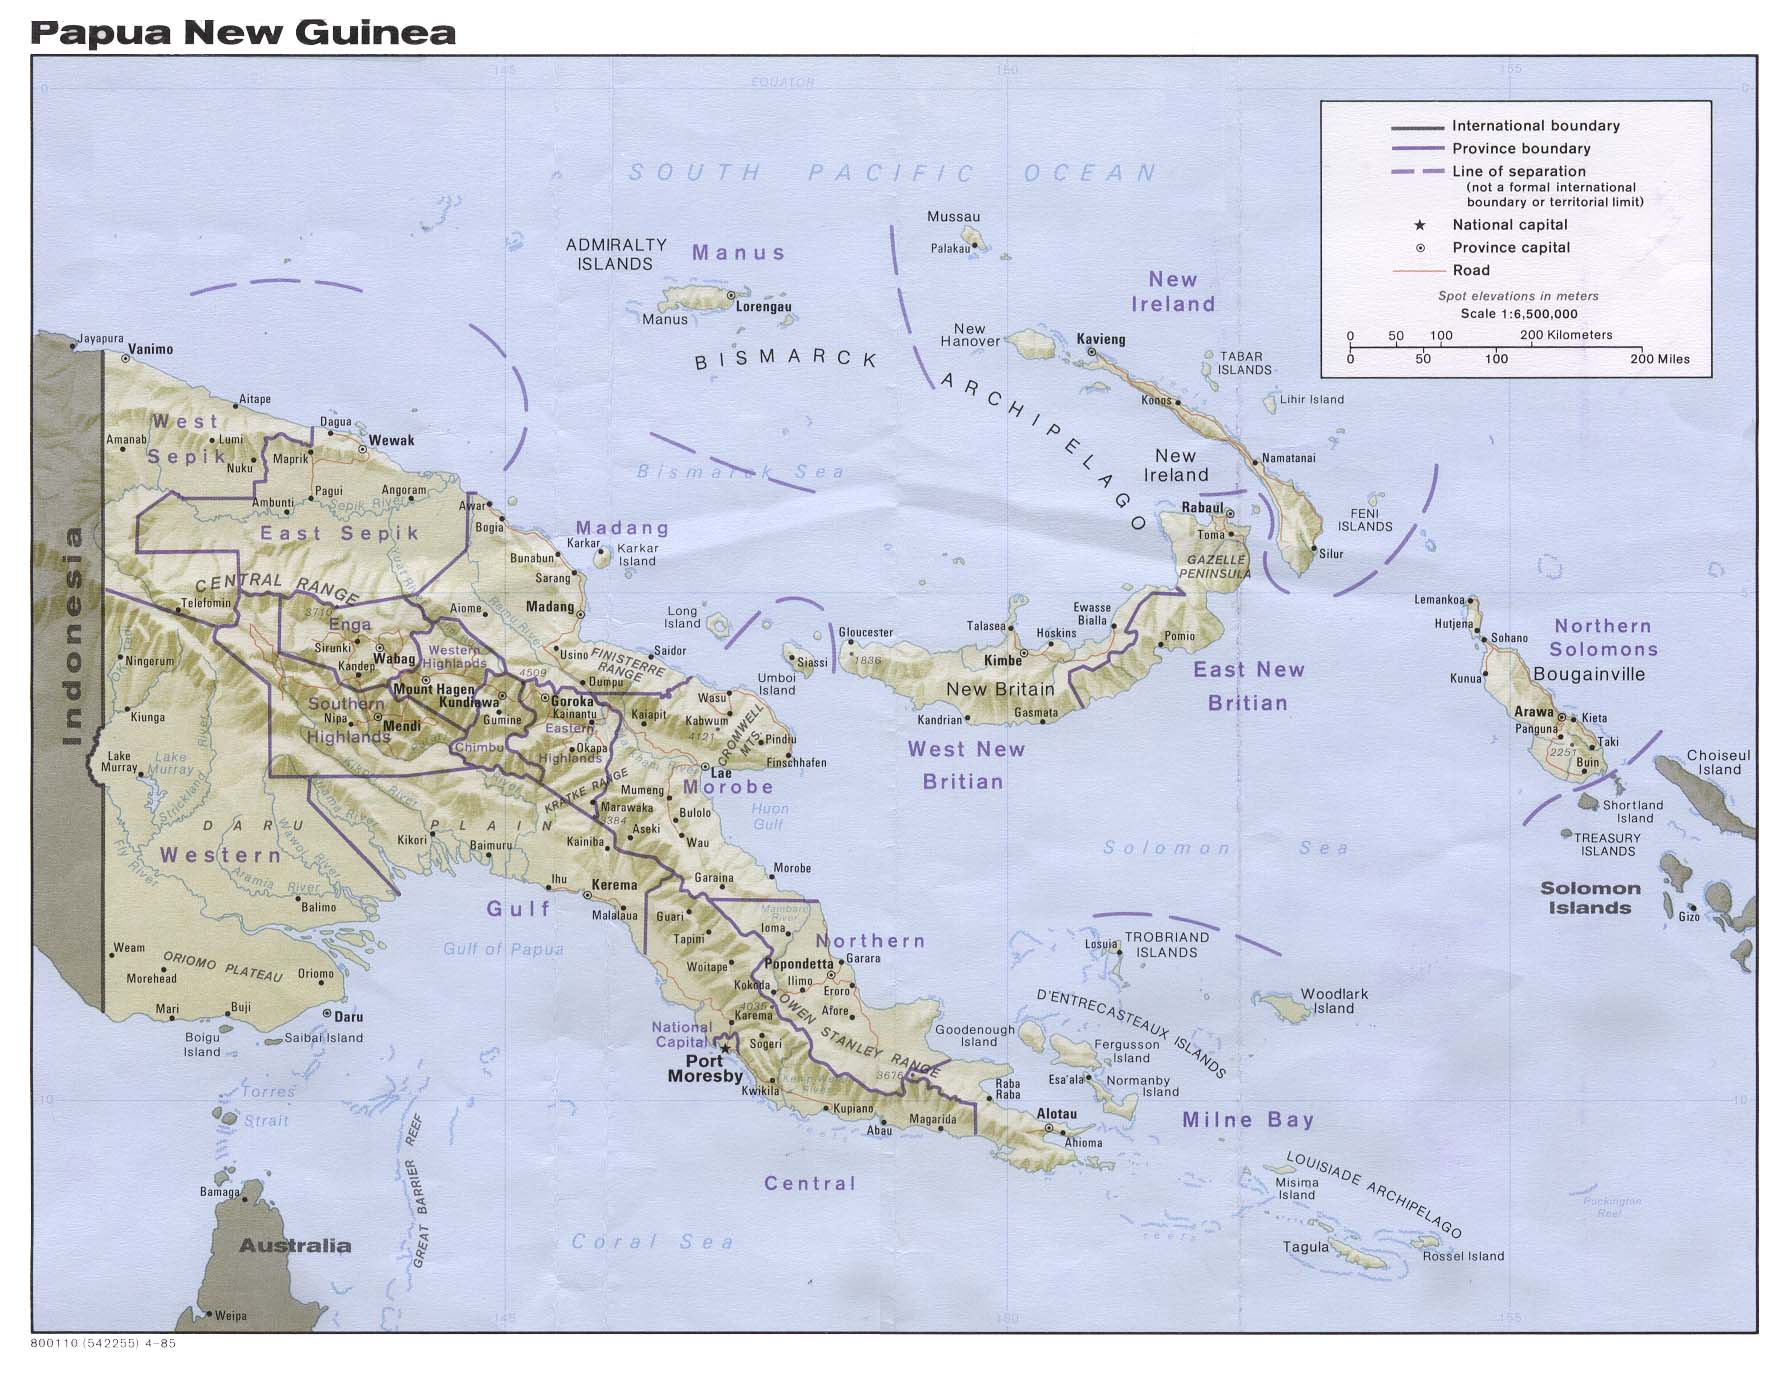 Cairns Charts And Maps